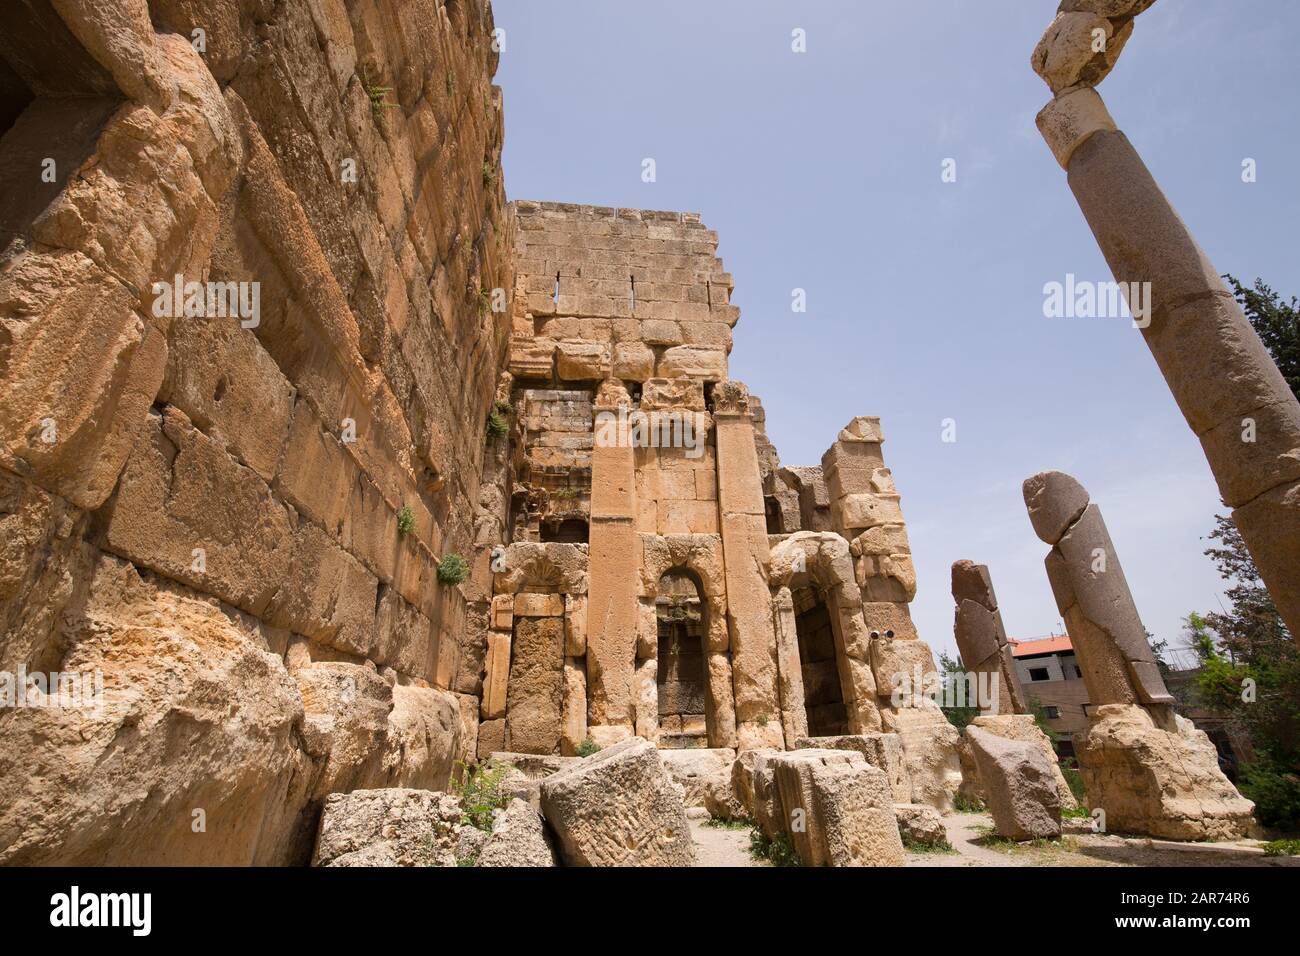 The Propylaeae. The ruins of the Roman city of Heliopolis or Baalbek in the Beqaa Valley. Baalbek, Lebanon - June, 2019 Stock Photo